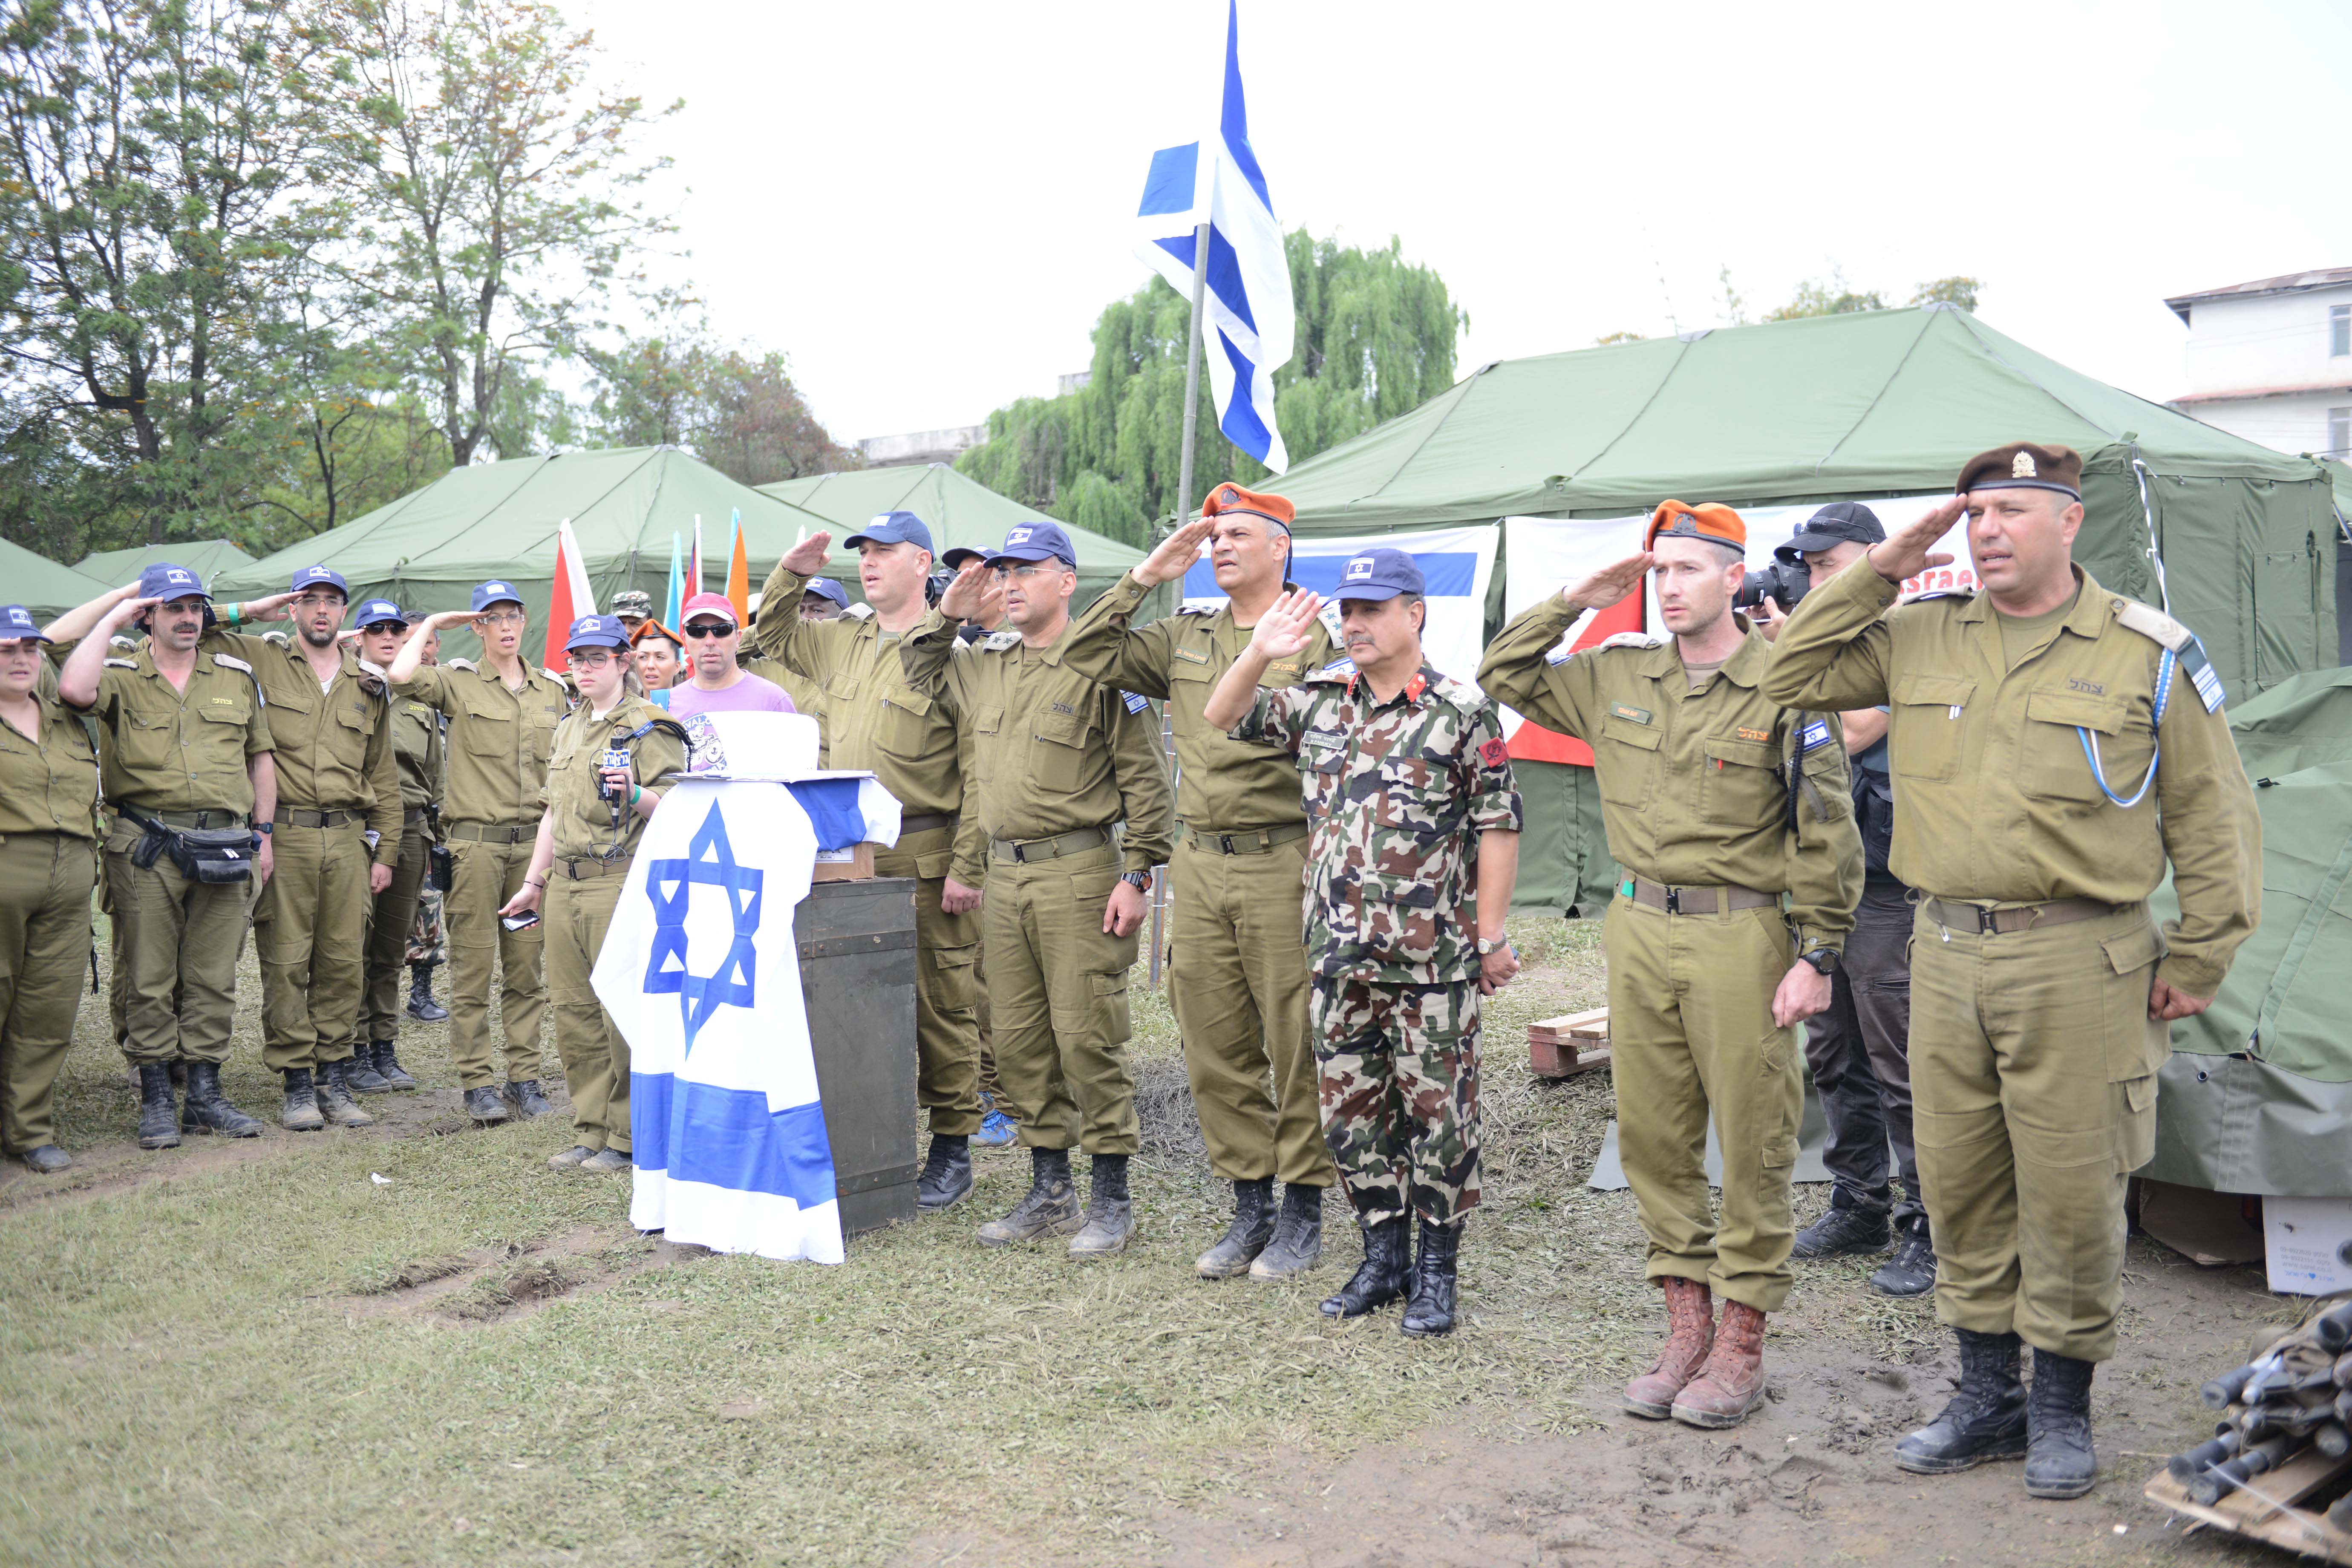 Israeli soldiers establish a field hospital together with the Nepalese army, in Nepal, following the deadly earthquake. (IDF Spokesperson)